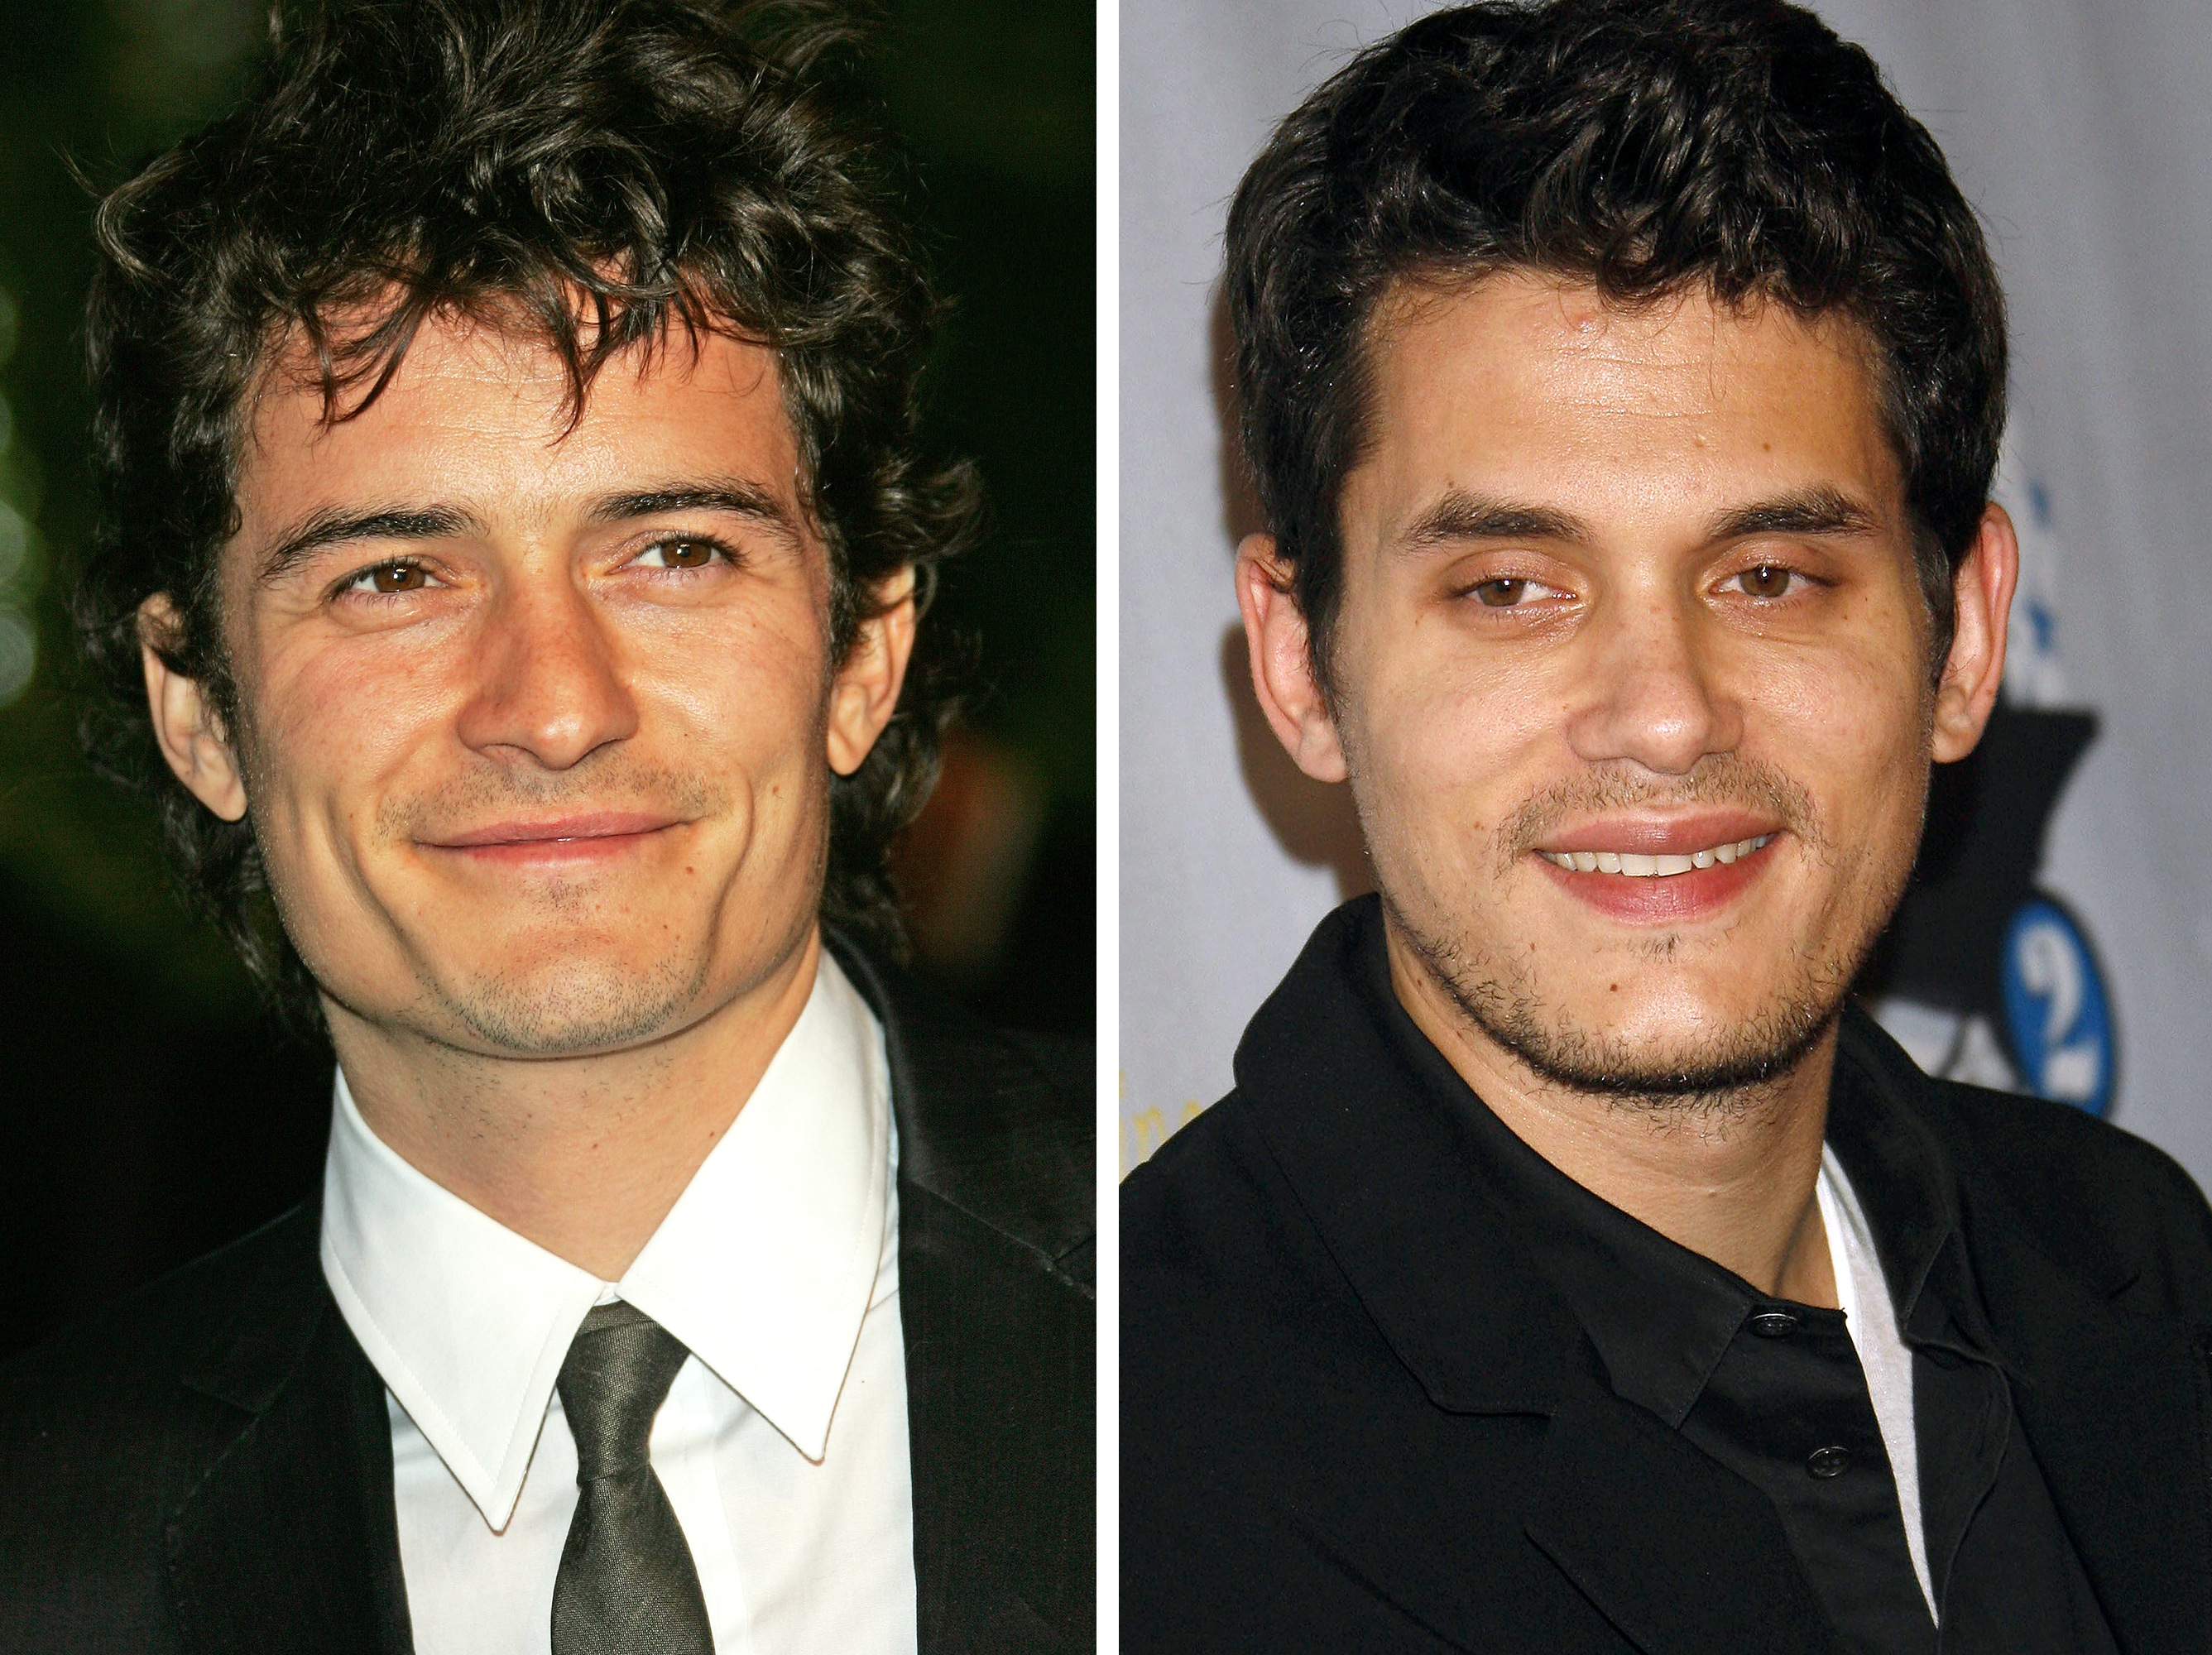 Orlando Bloom, 2007 and John Mayer, 2009 | Source: Getty Images